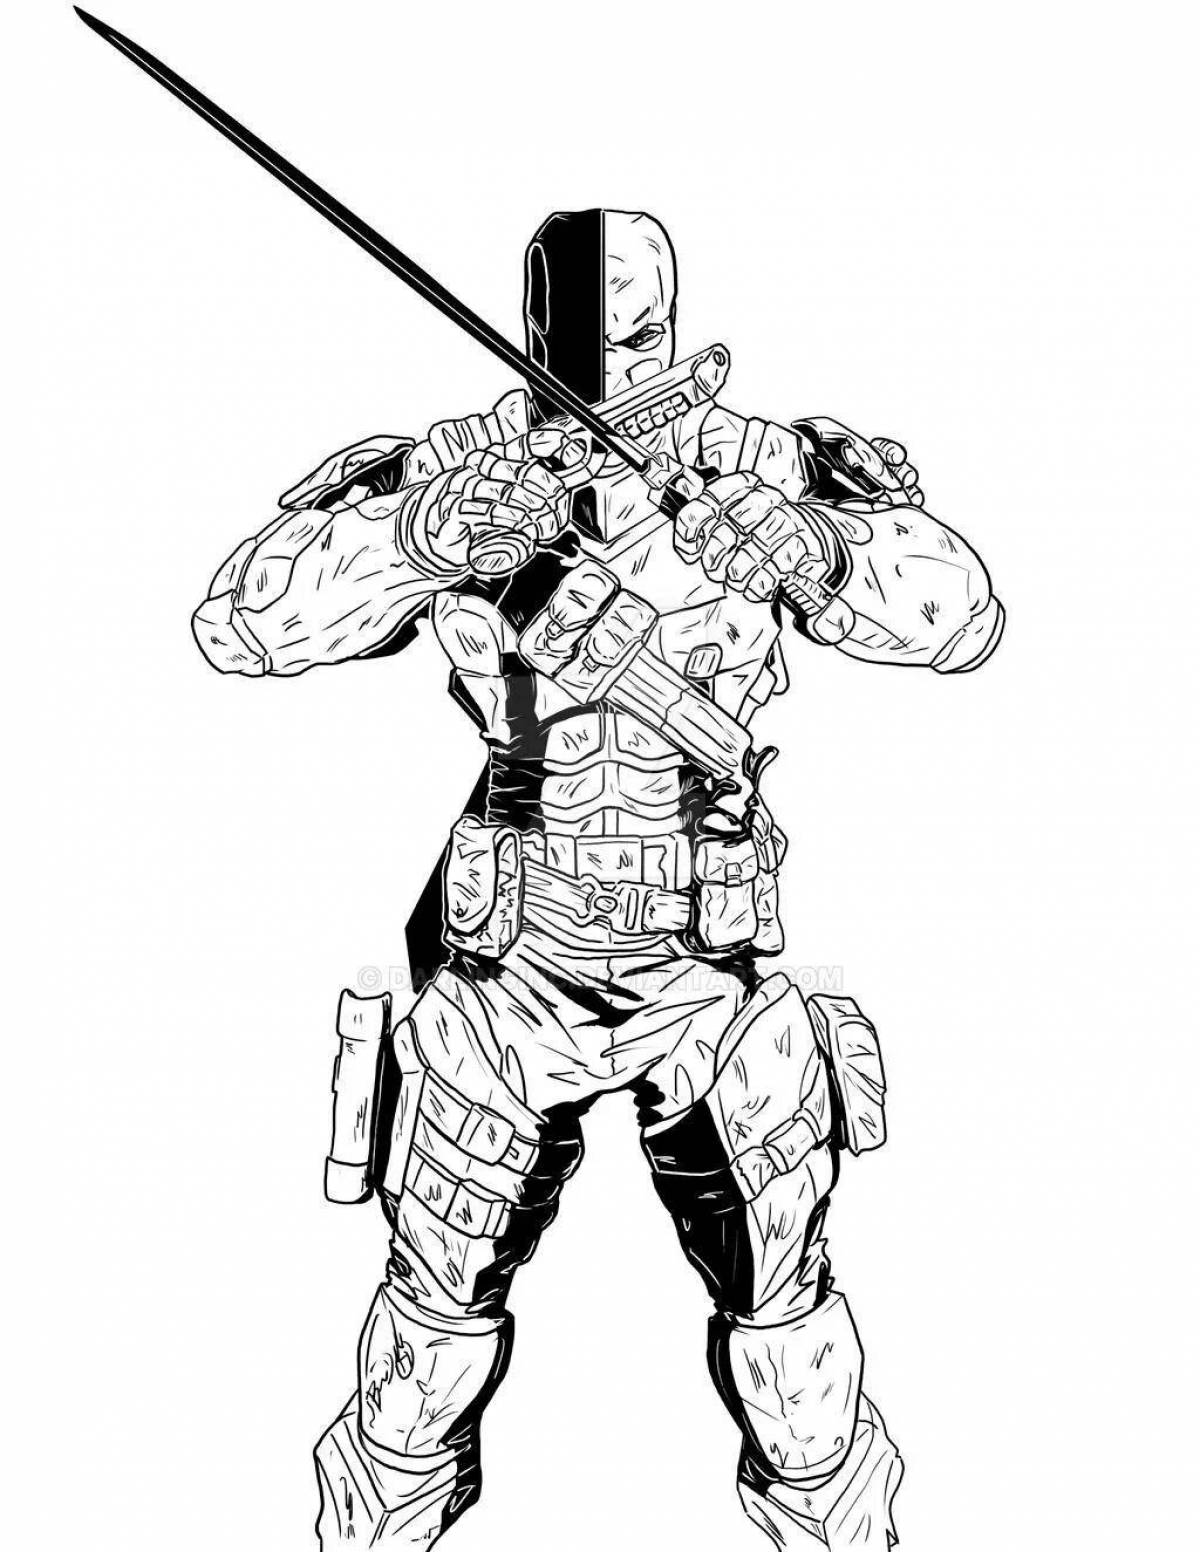 Deathstroke amazing coloring page